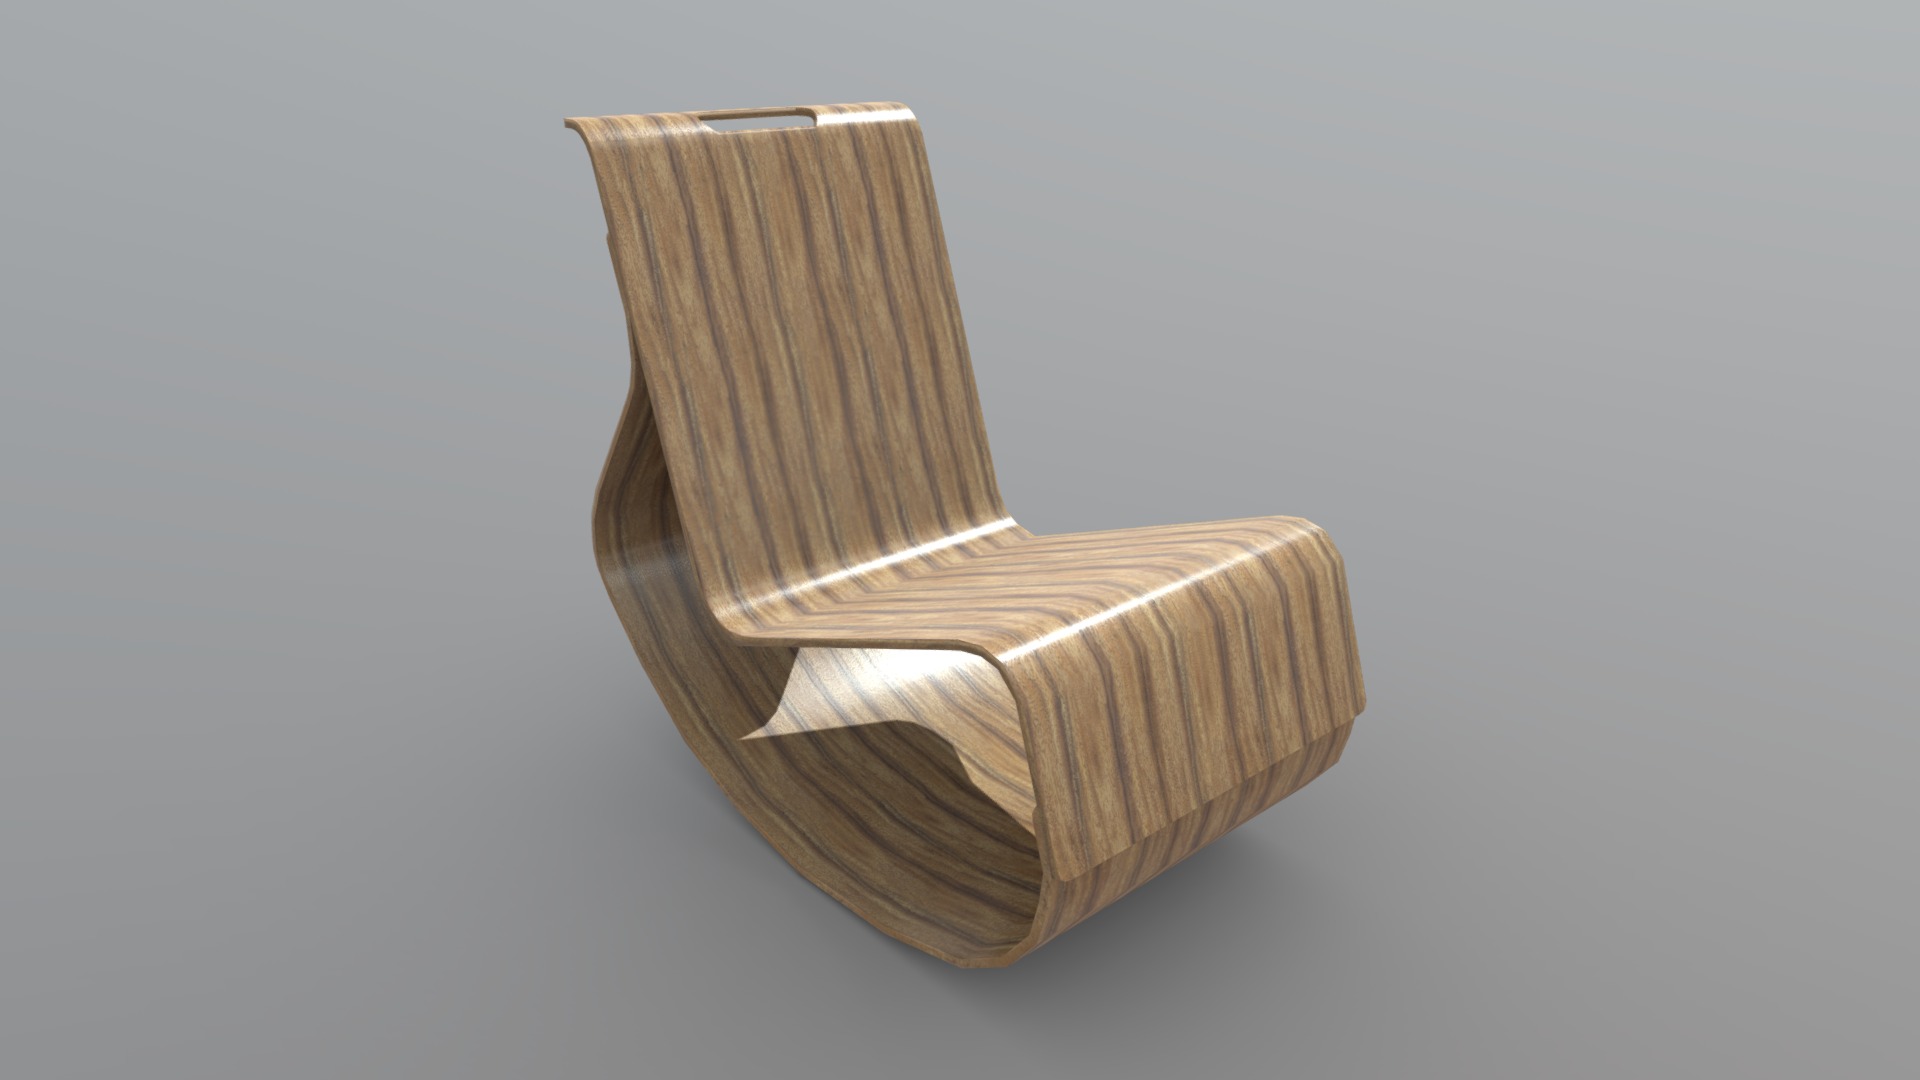 3D model Rocking Chair 2 - This is a 3D model of the Rocking Chair 2. The 3D model is about a wooden block on a white background.